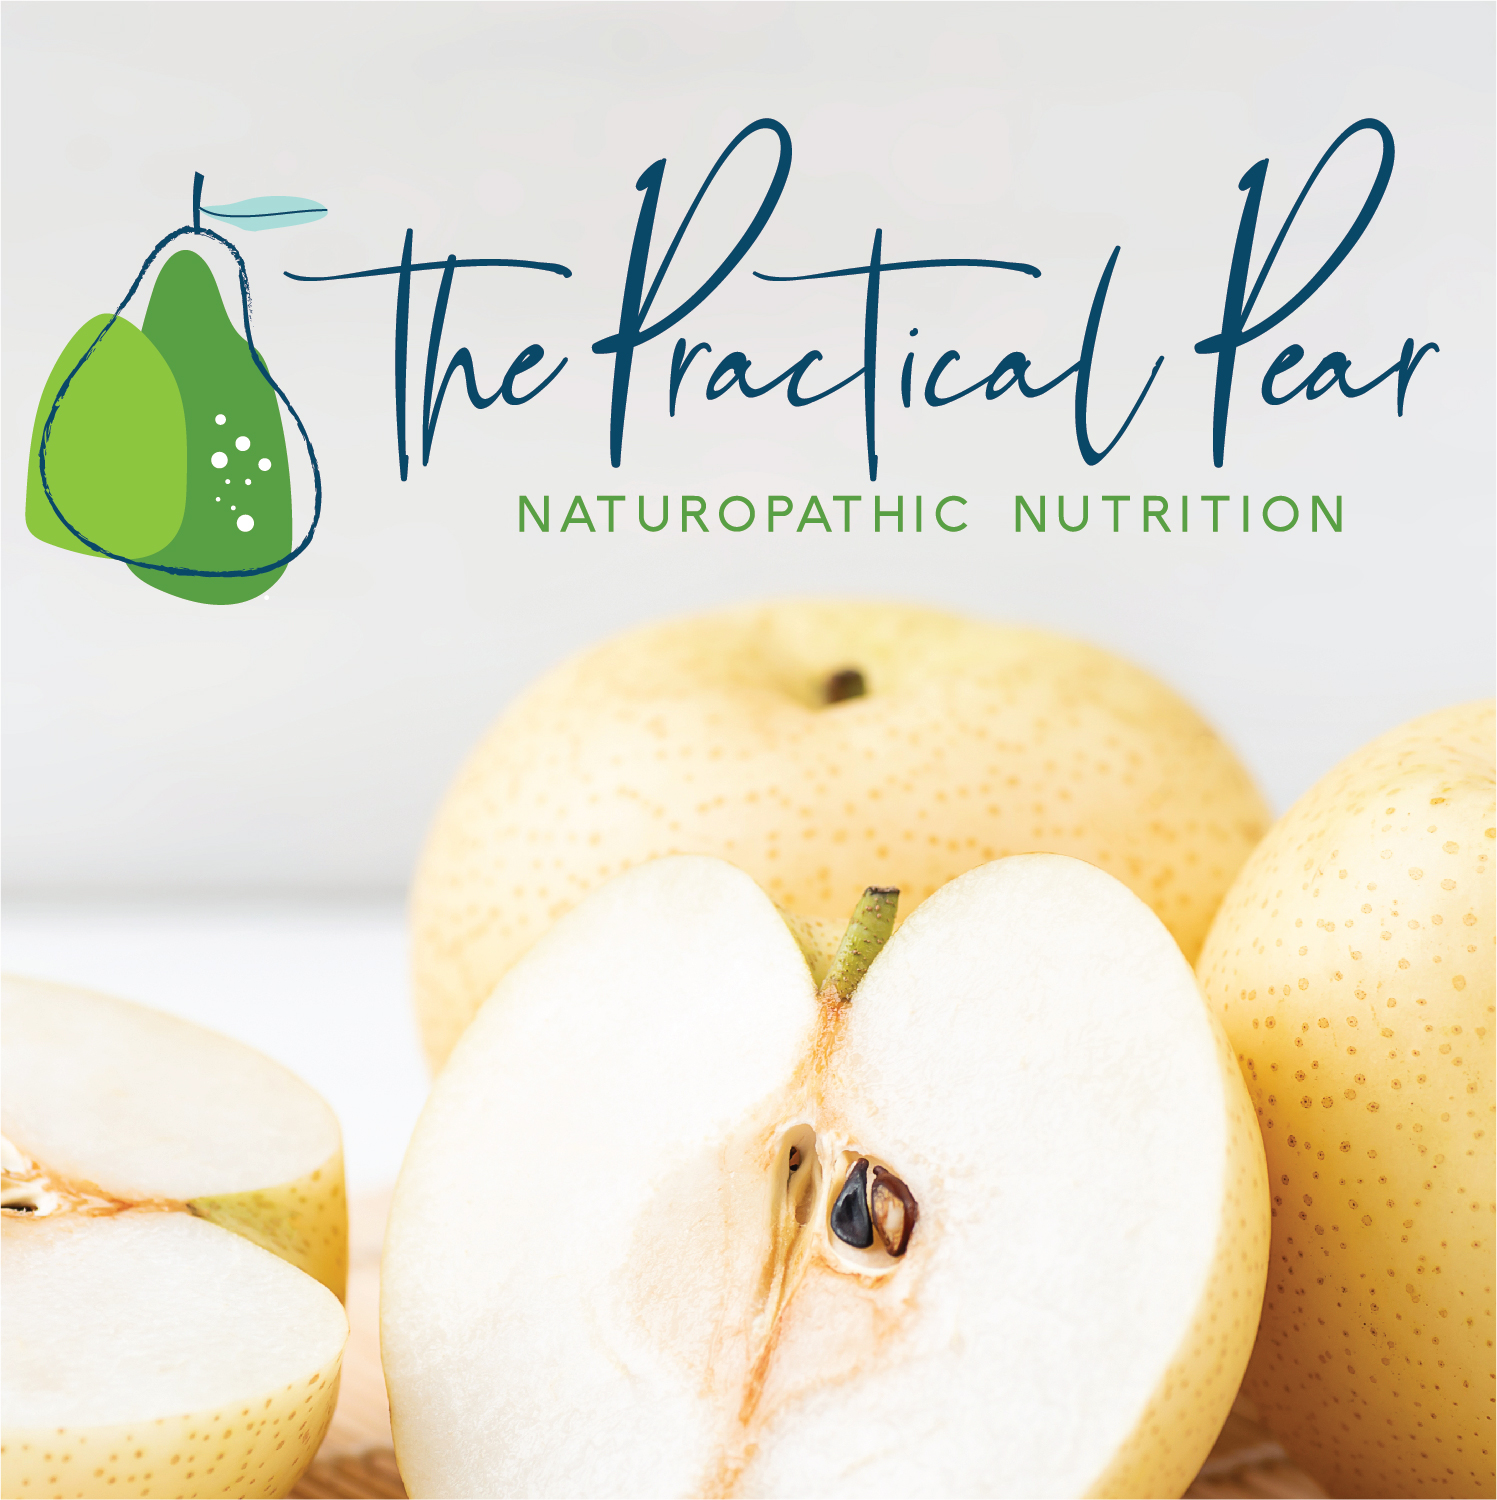 THE PRACTICAL PEAR by bl3nd design graphic design agency in abbotsford british columbia canada